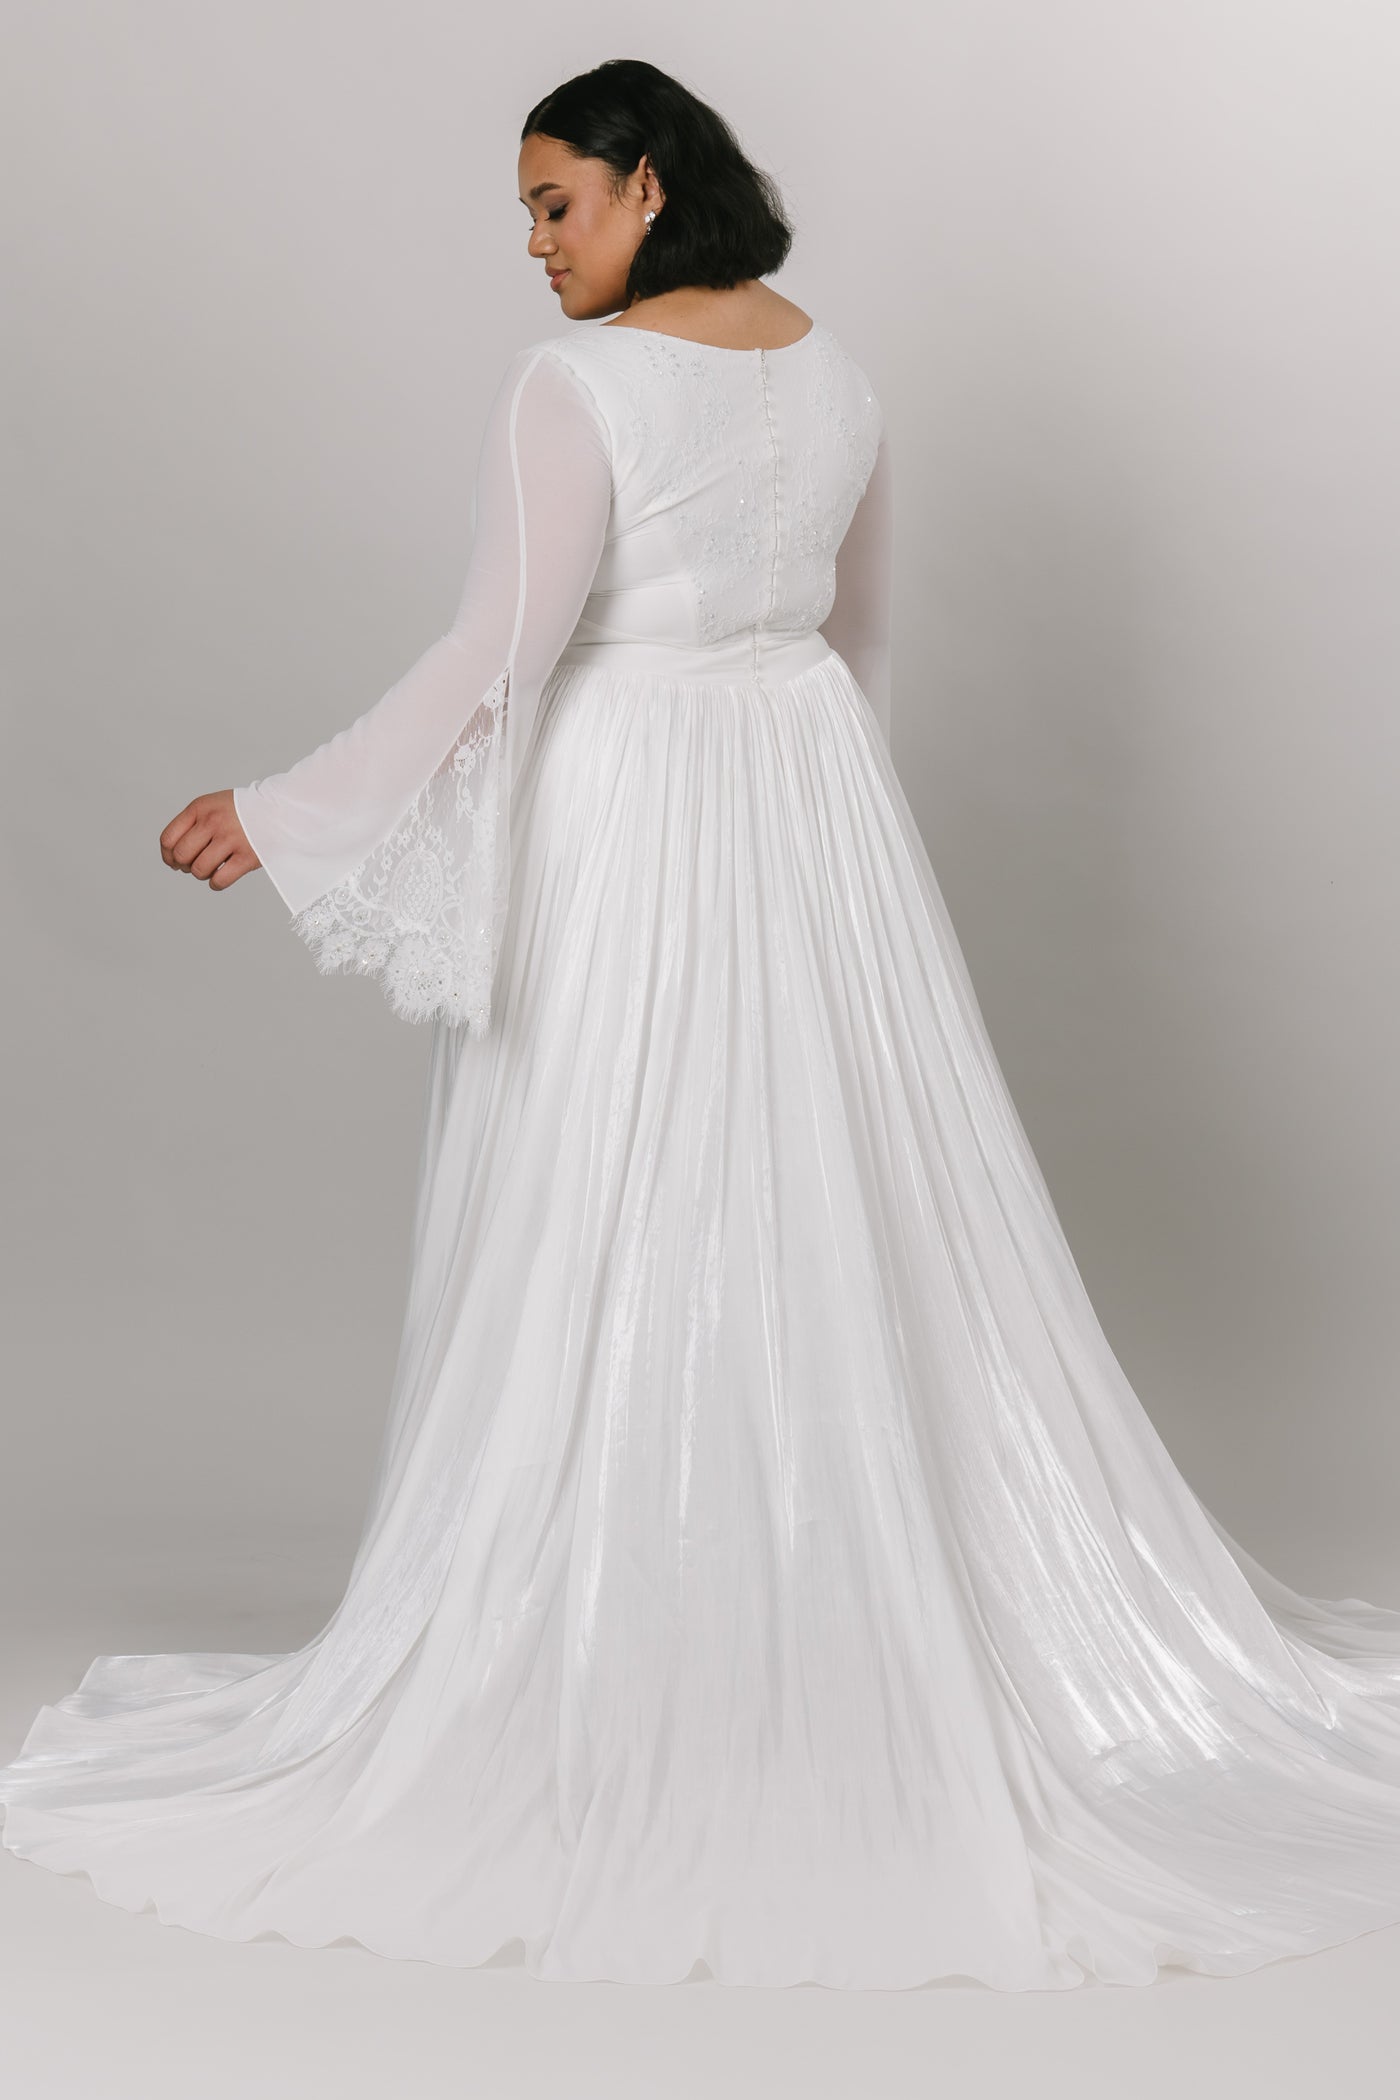 Back view of elegant modest wedding dress with chiffon bell sleeves. This Moments Made Bridal dress has a v-neckline and aline fit. It has chiffon layers and is so flowy. This dress is perfect for twirling and enjoying your wedding day.